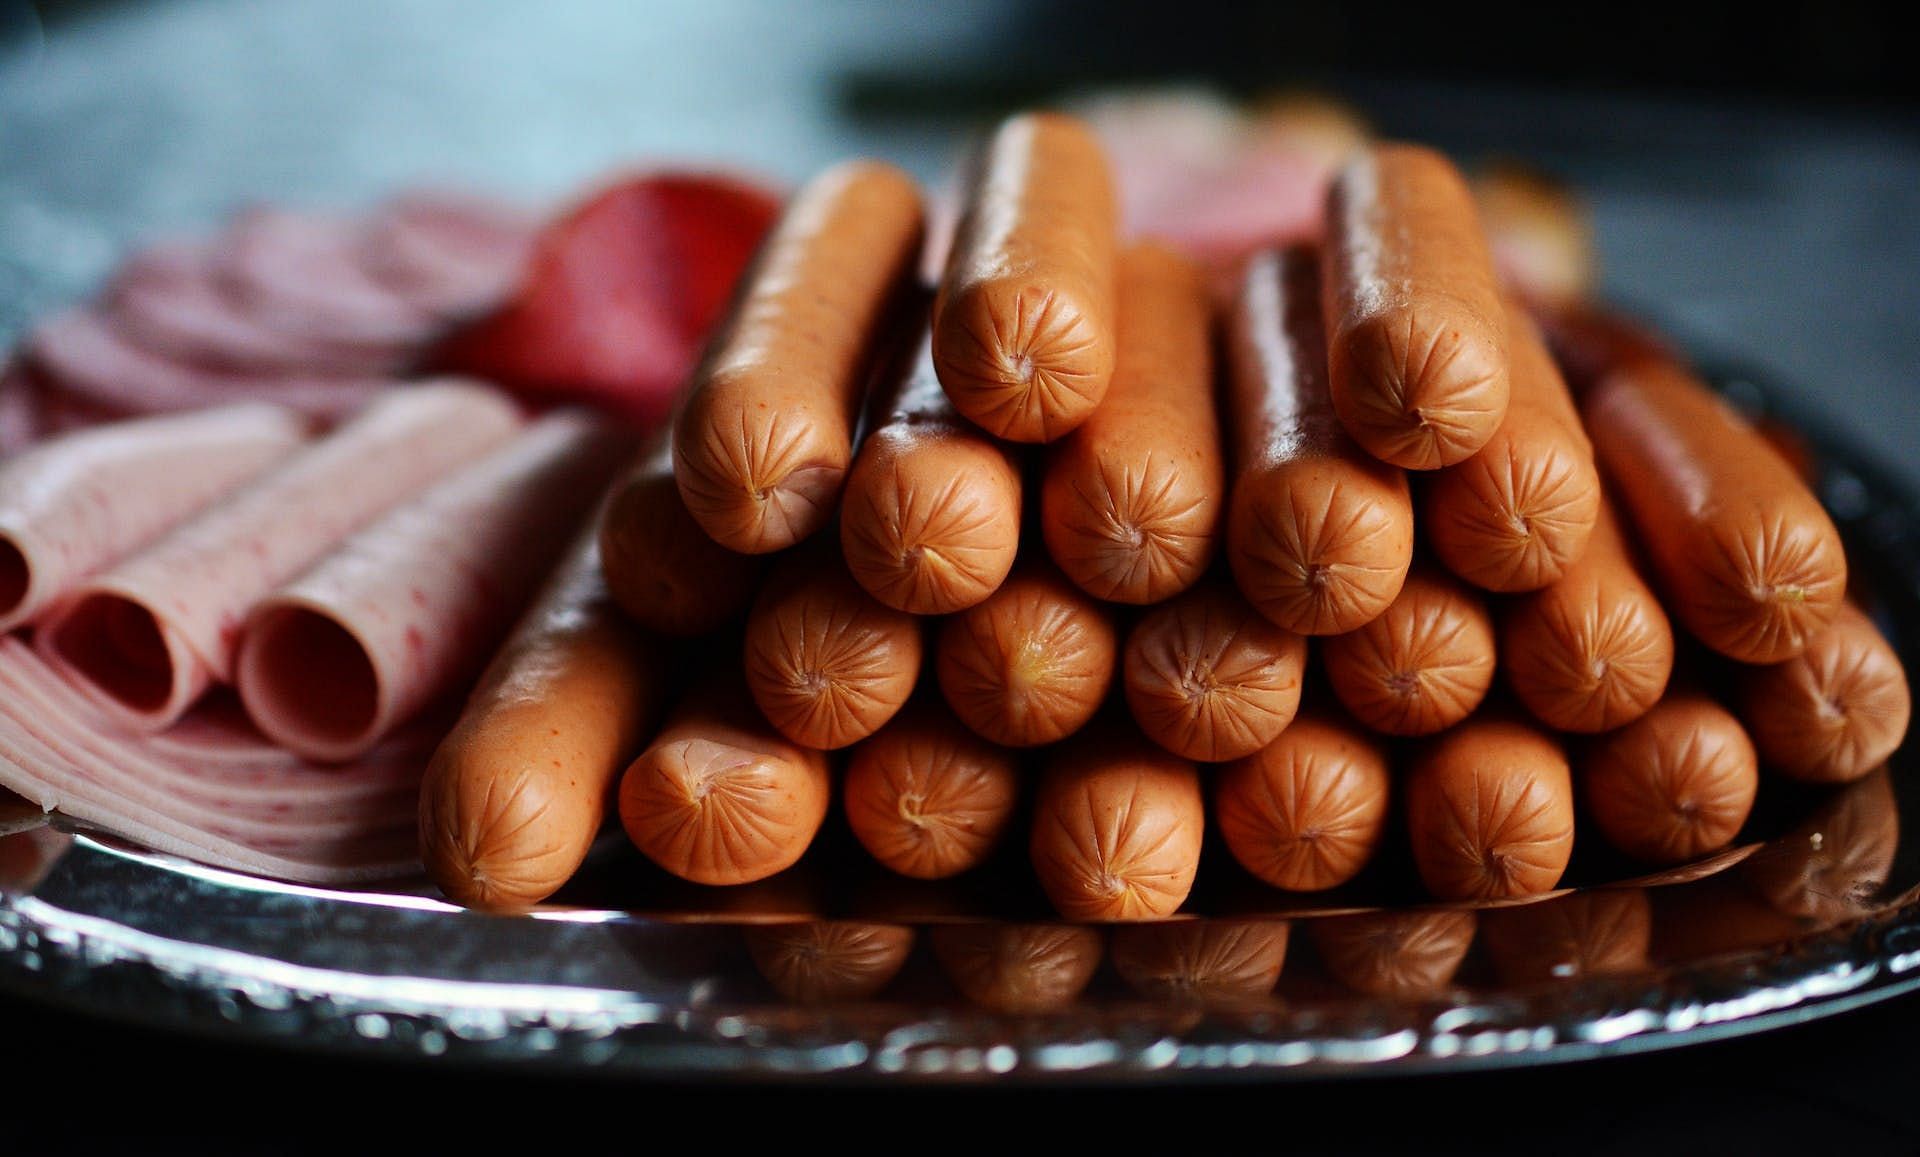 Processed meats are loaded with saturated fats. (Image via Pexels/Pixabay)